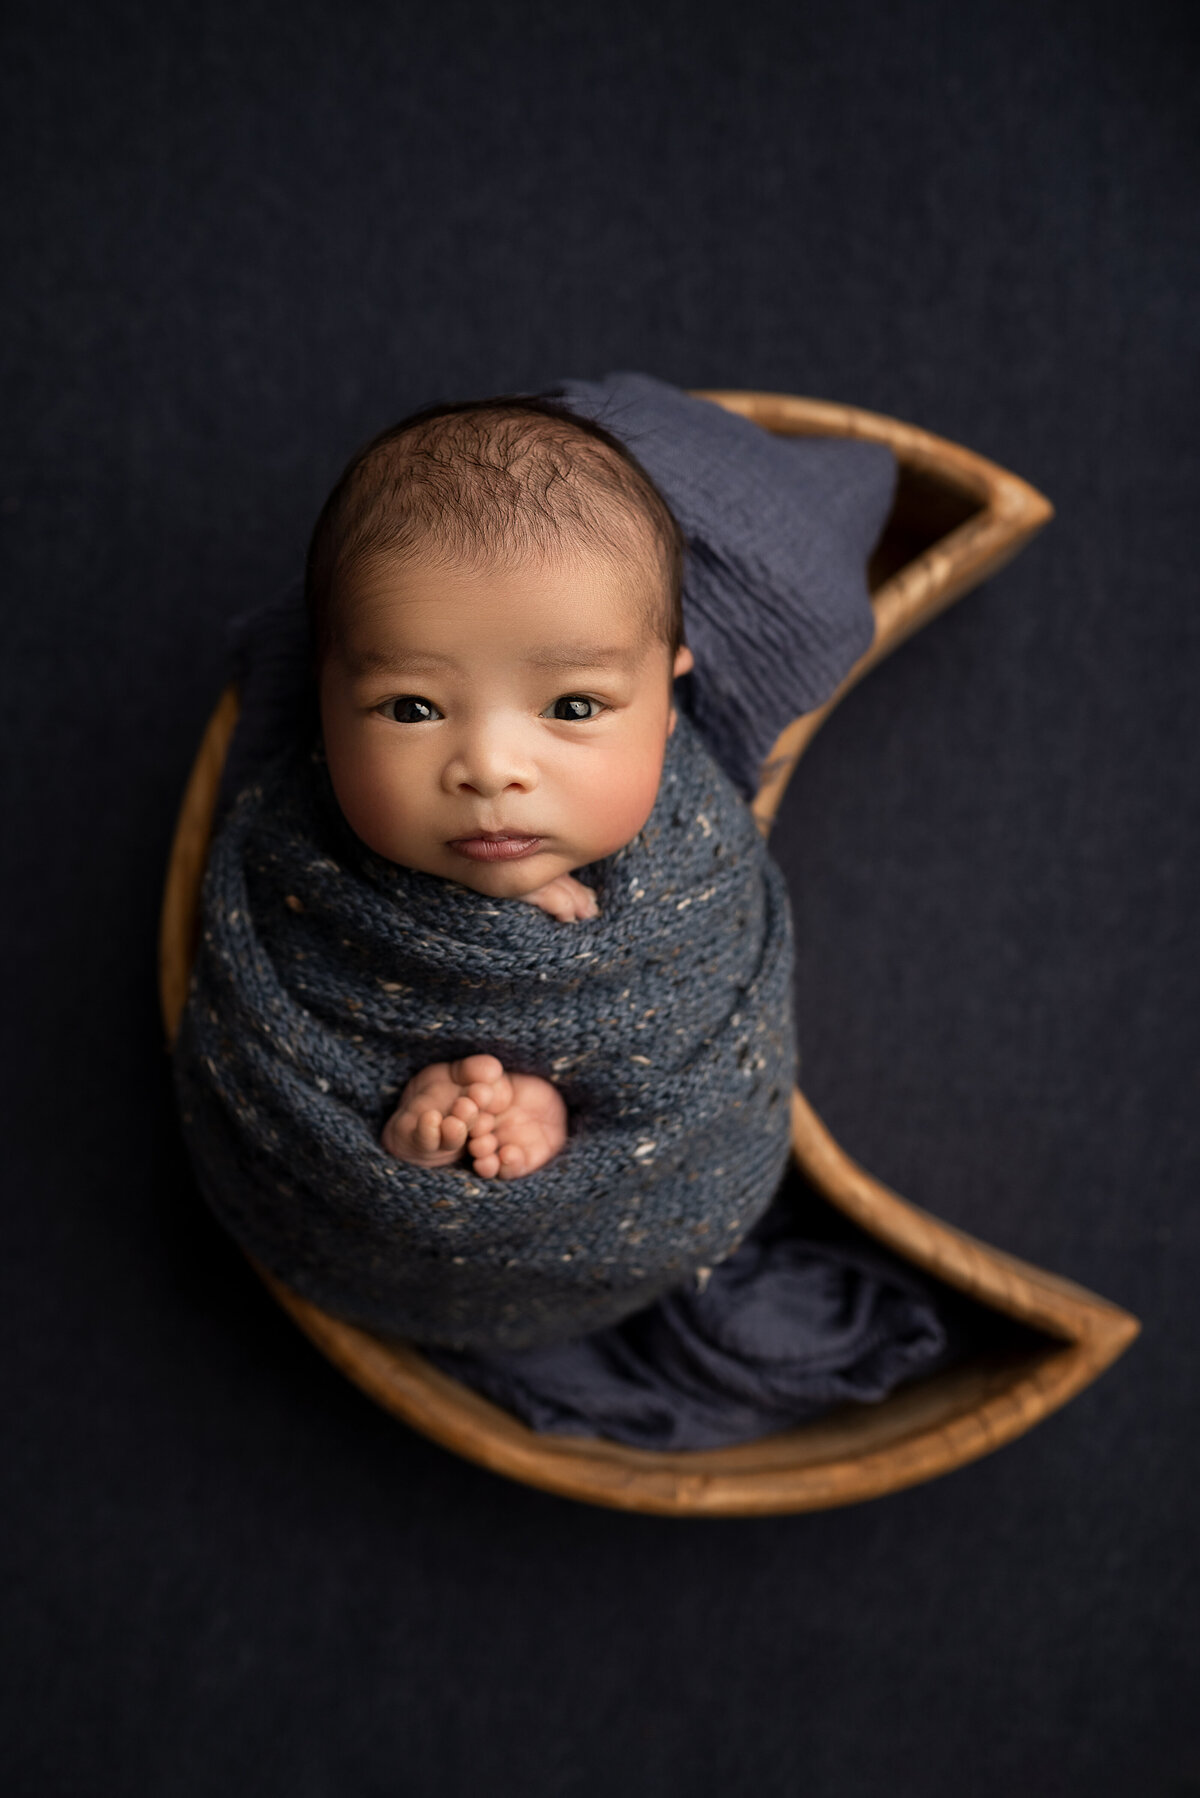 Katie Marshall, New Jersey's best newborn photographer captures a baby boy's fine art newborn photoshoot. Baby is swaddled in a deep blue-grey marled swaddle with his fingers and toes peeking out. He is looking directly at the camera and laying in a moon-shaped bowl. Aerial Image.